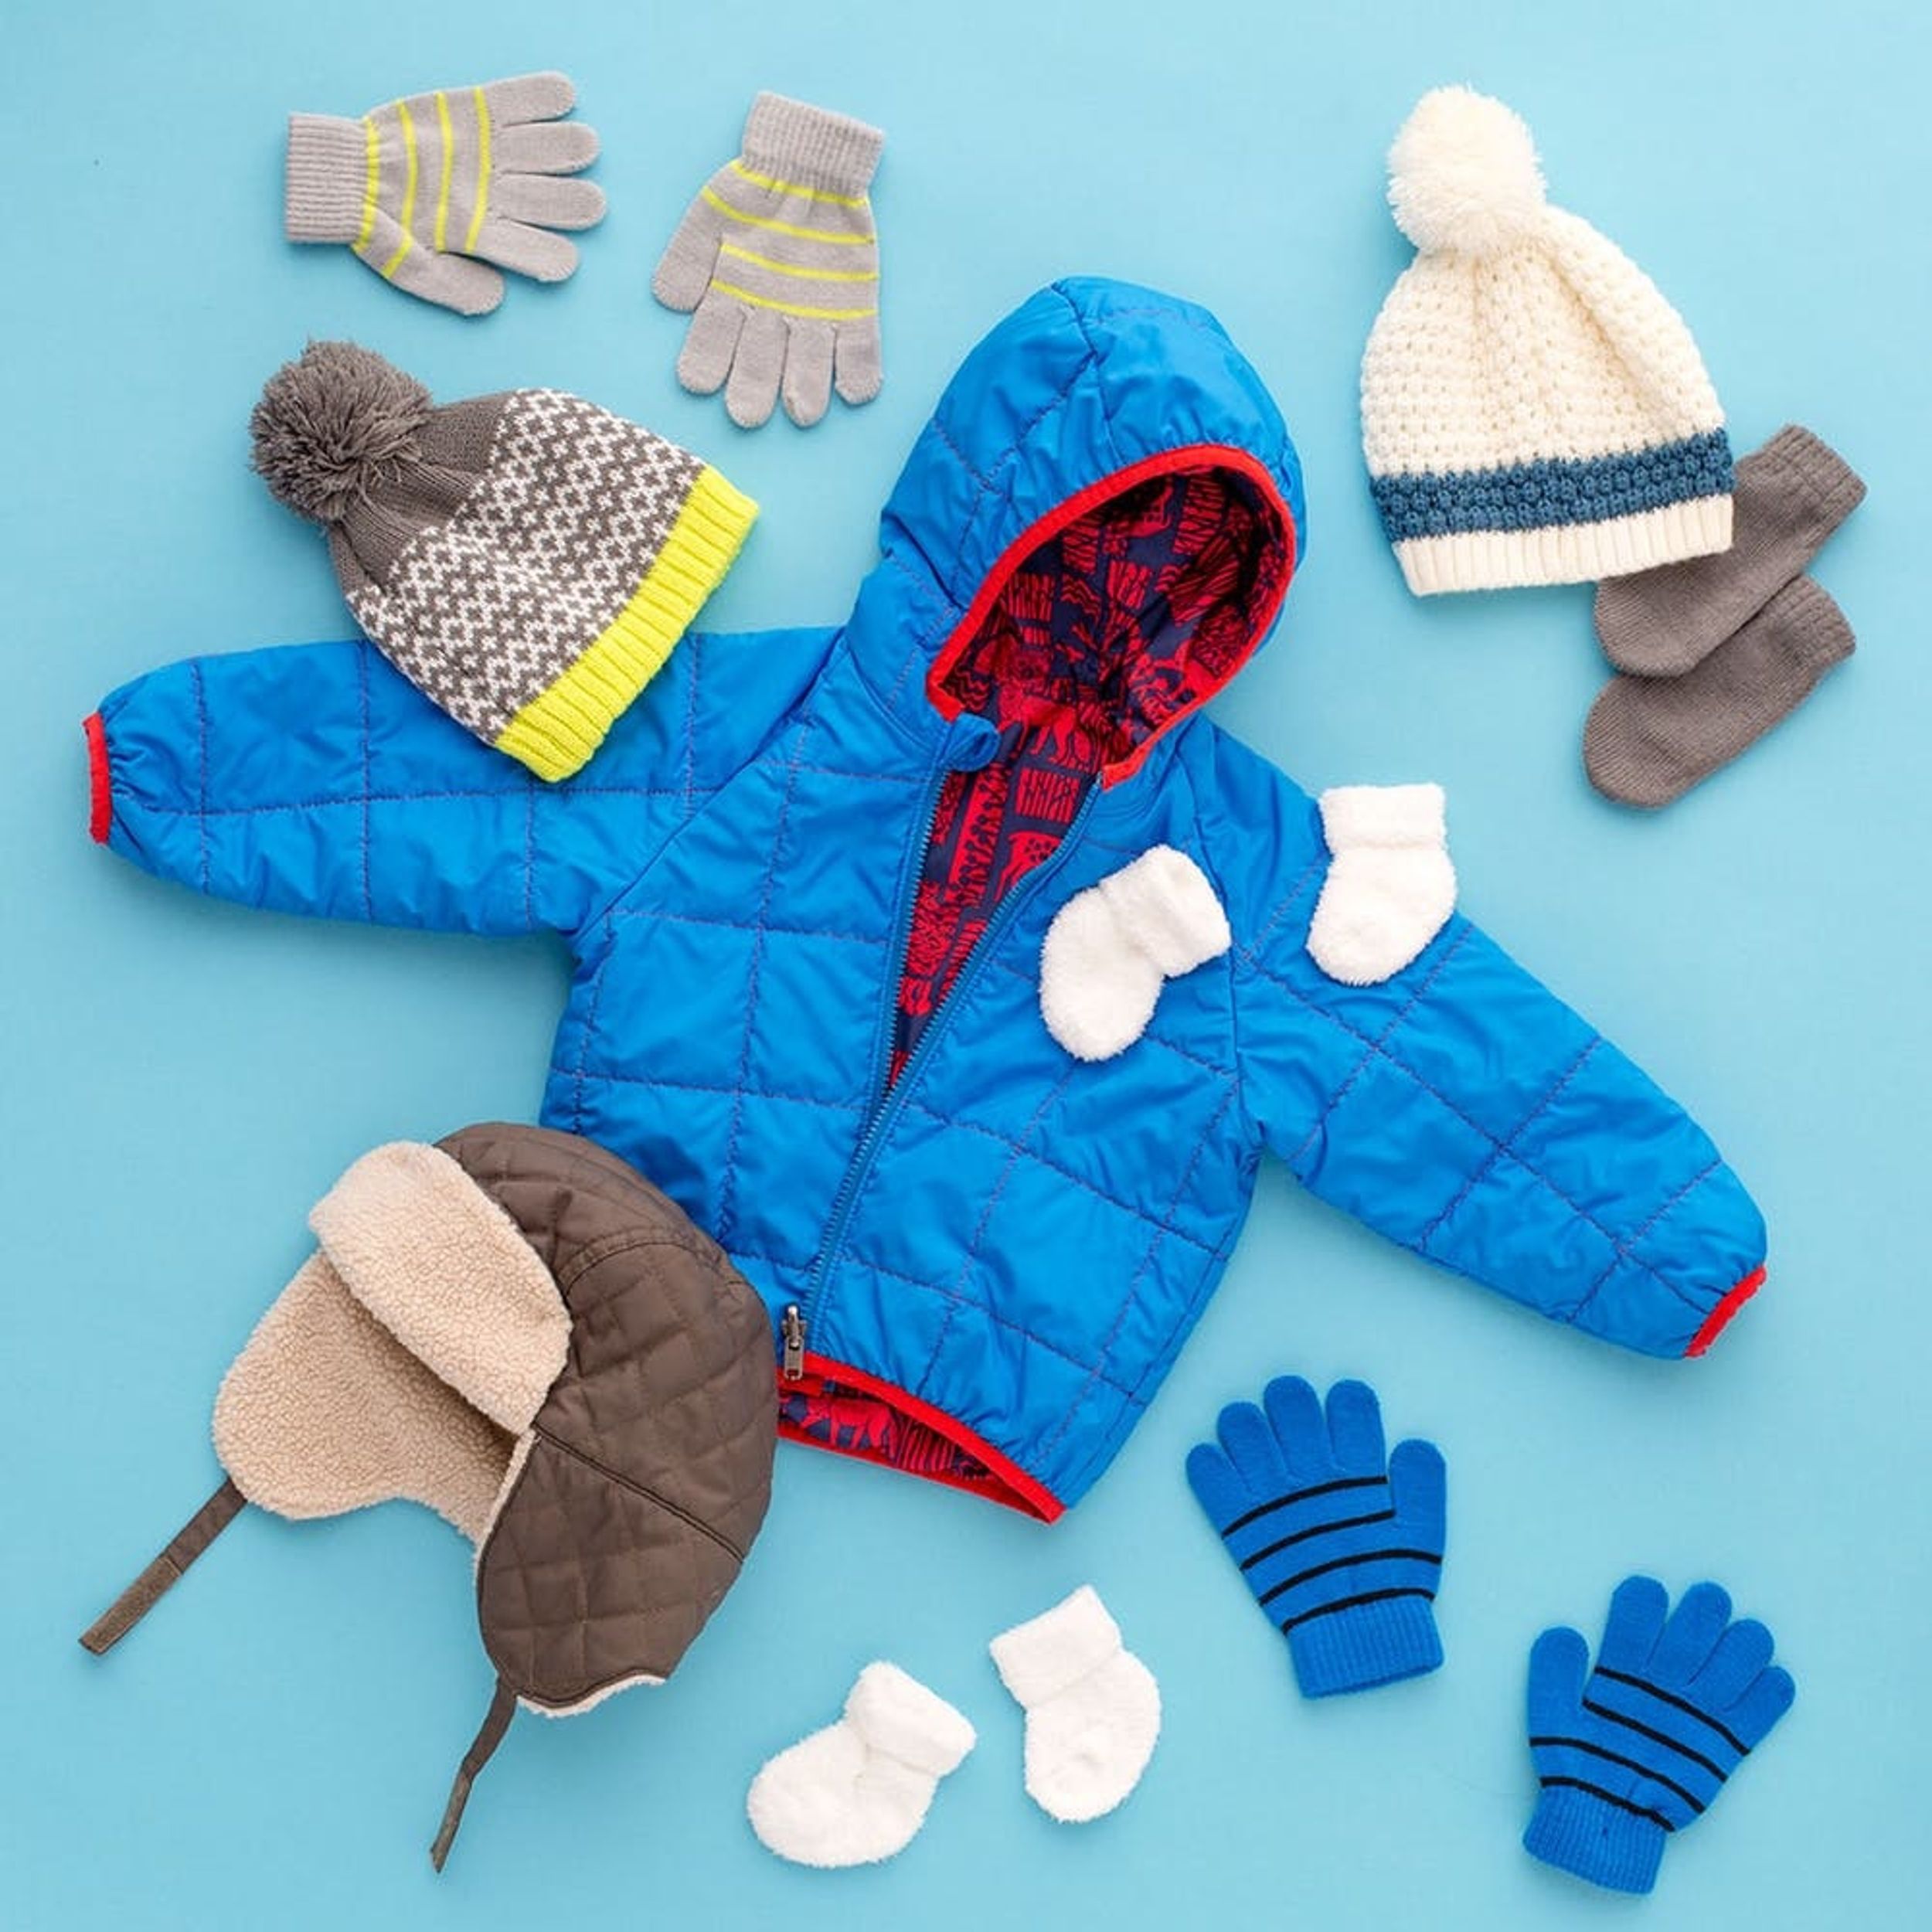 10 Winter Survival Tips Every Parent Needs to Know